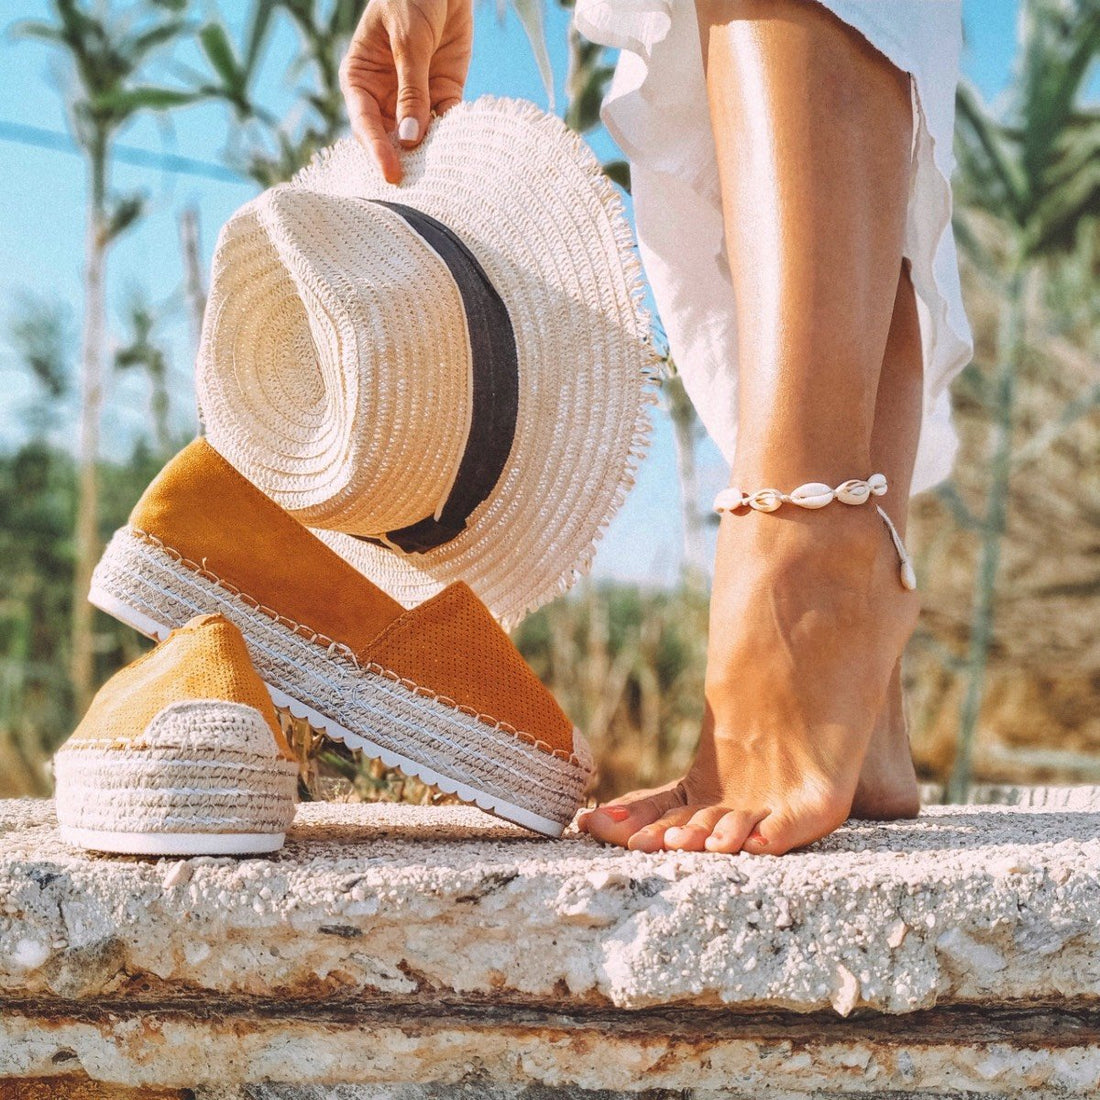 The feet of a barefoot women wearing a seashell ankle bracelet an orange pair of espadrilles are visible and a straw hat with a black band is in her hand